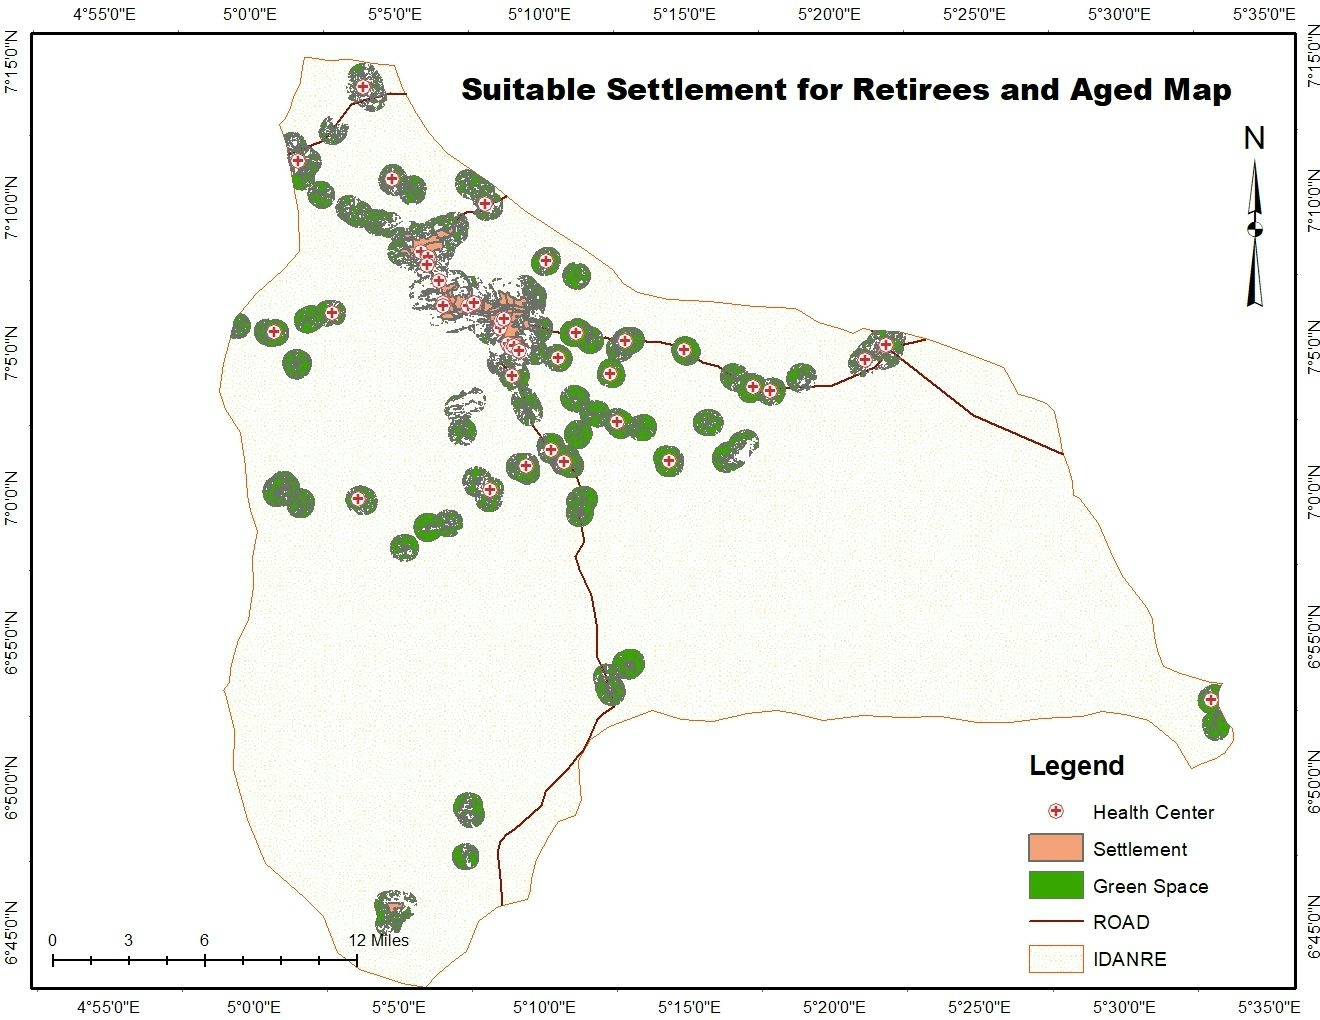 Suitable settlements for retirees.